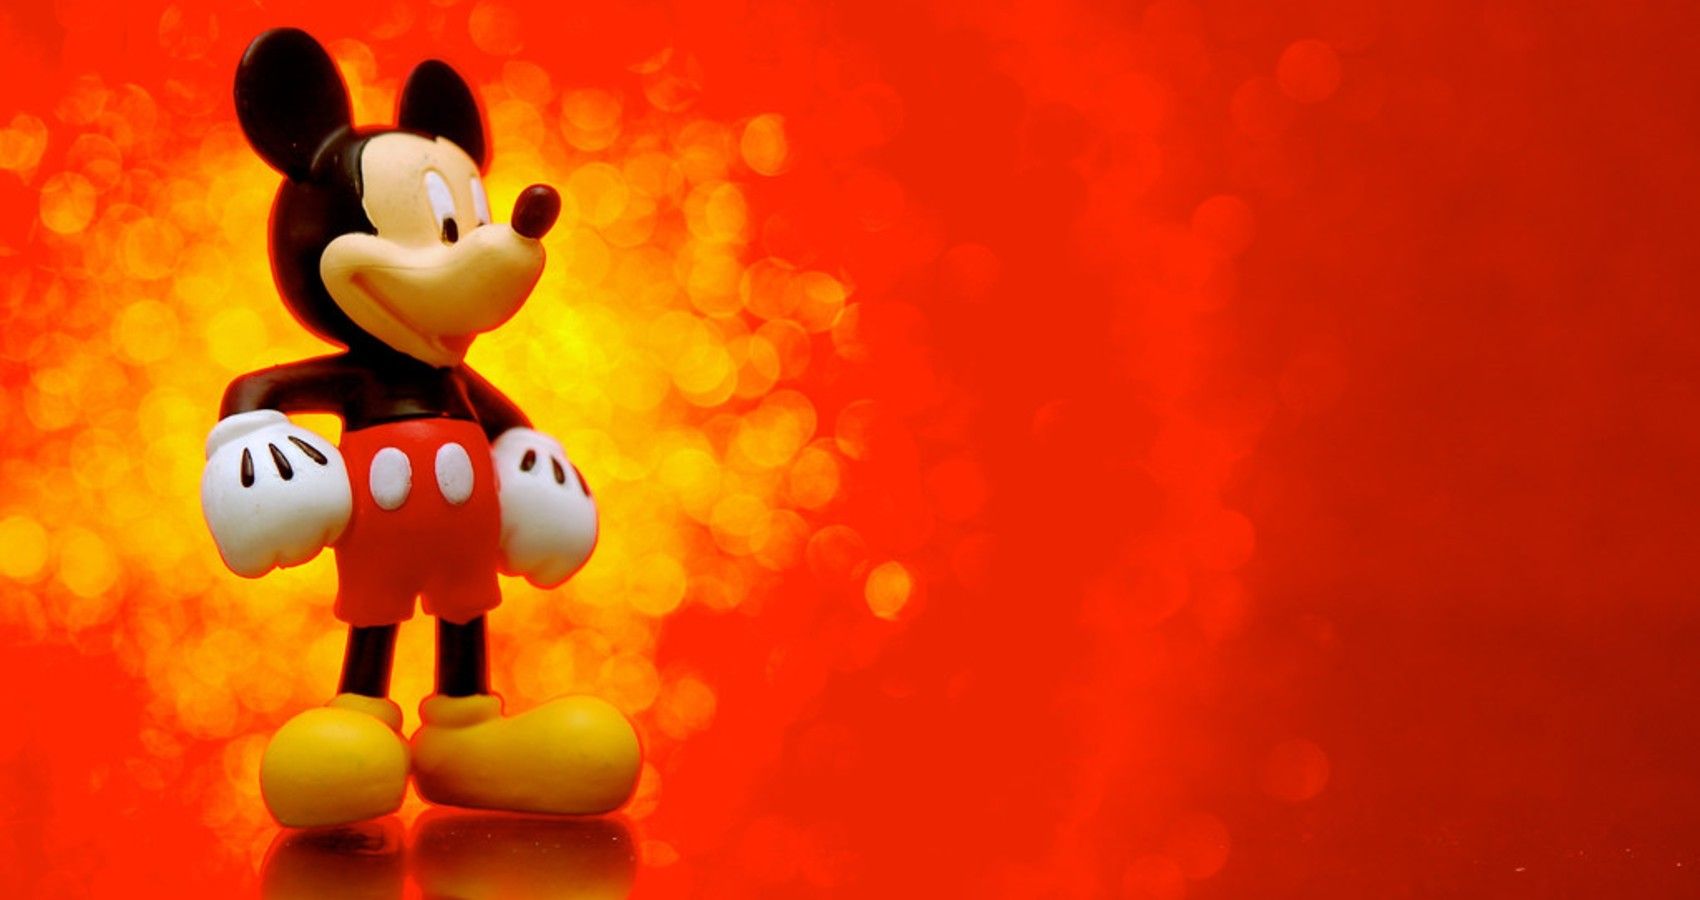 A mickey mouse on a red background